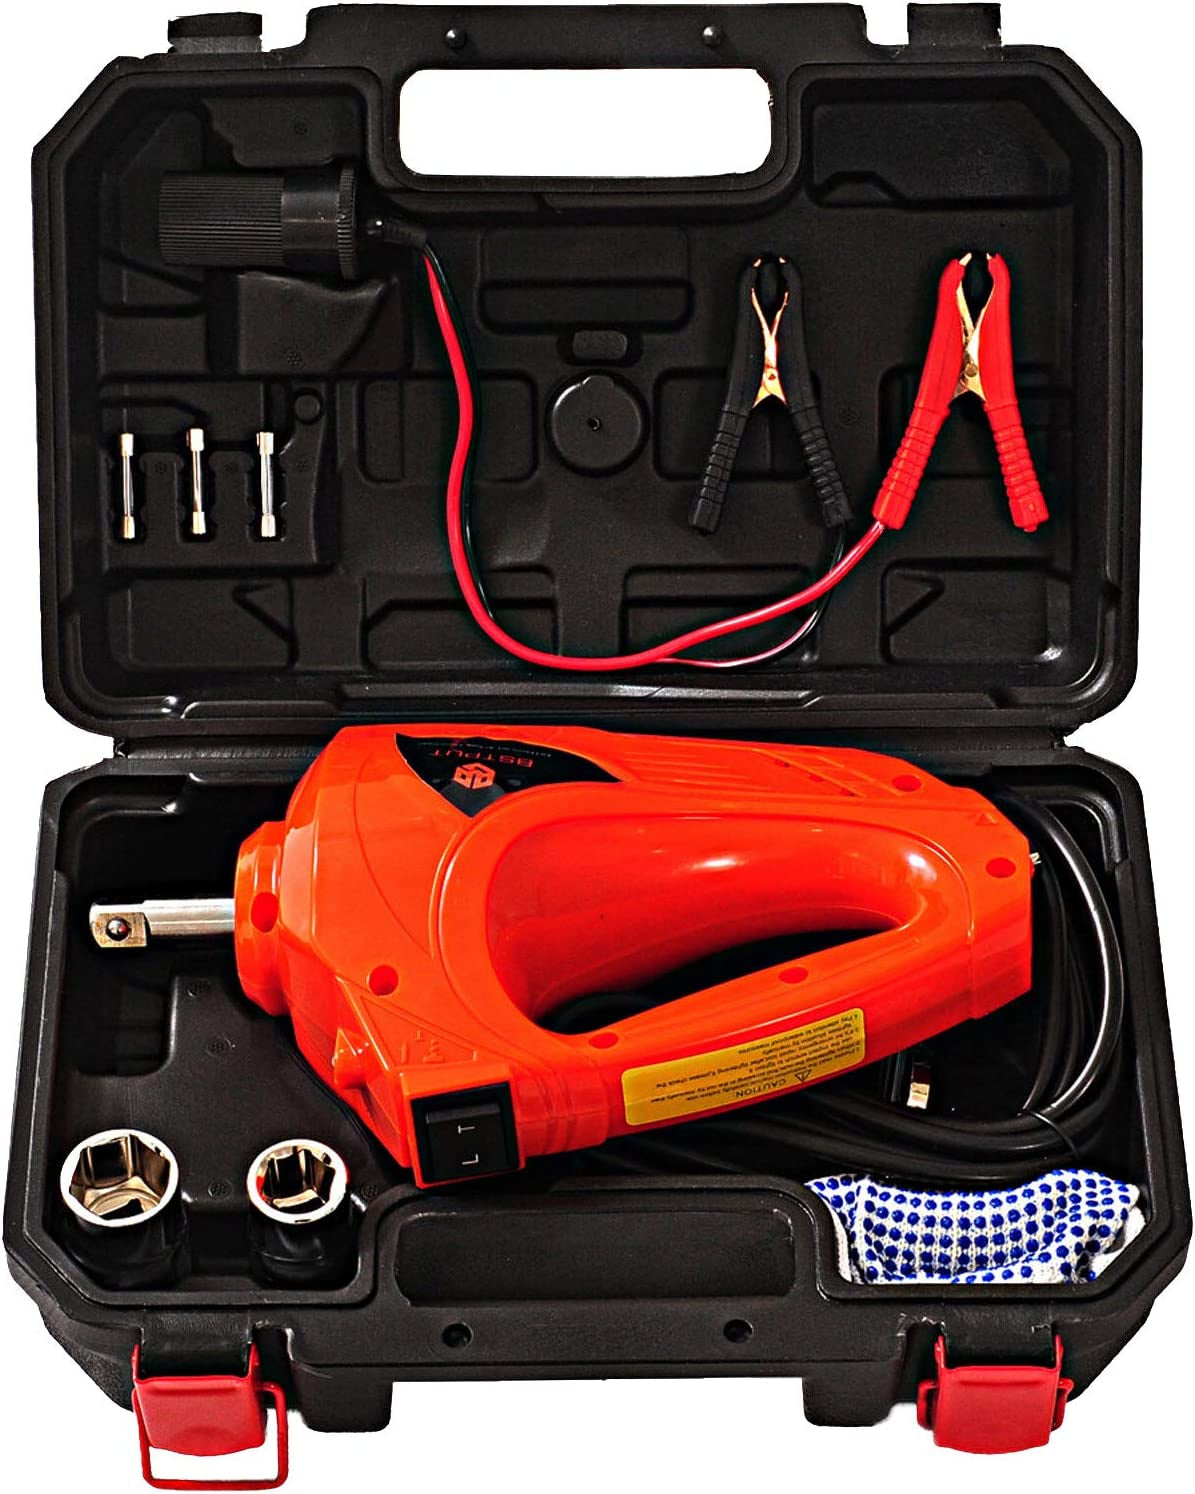 E-HEELP, E-HEELP Electric Impact Wrench 12V 480N.M Emergency Tool Kit for Car Tire Changes